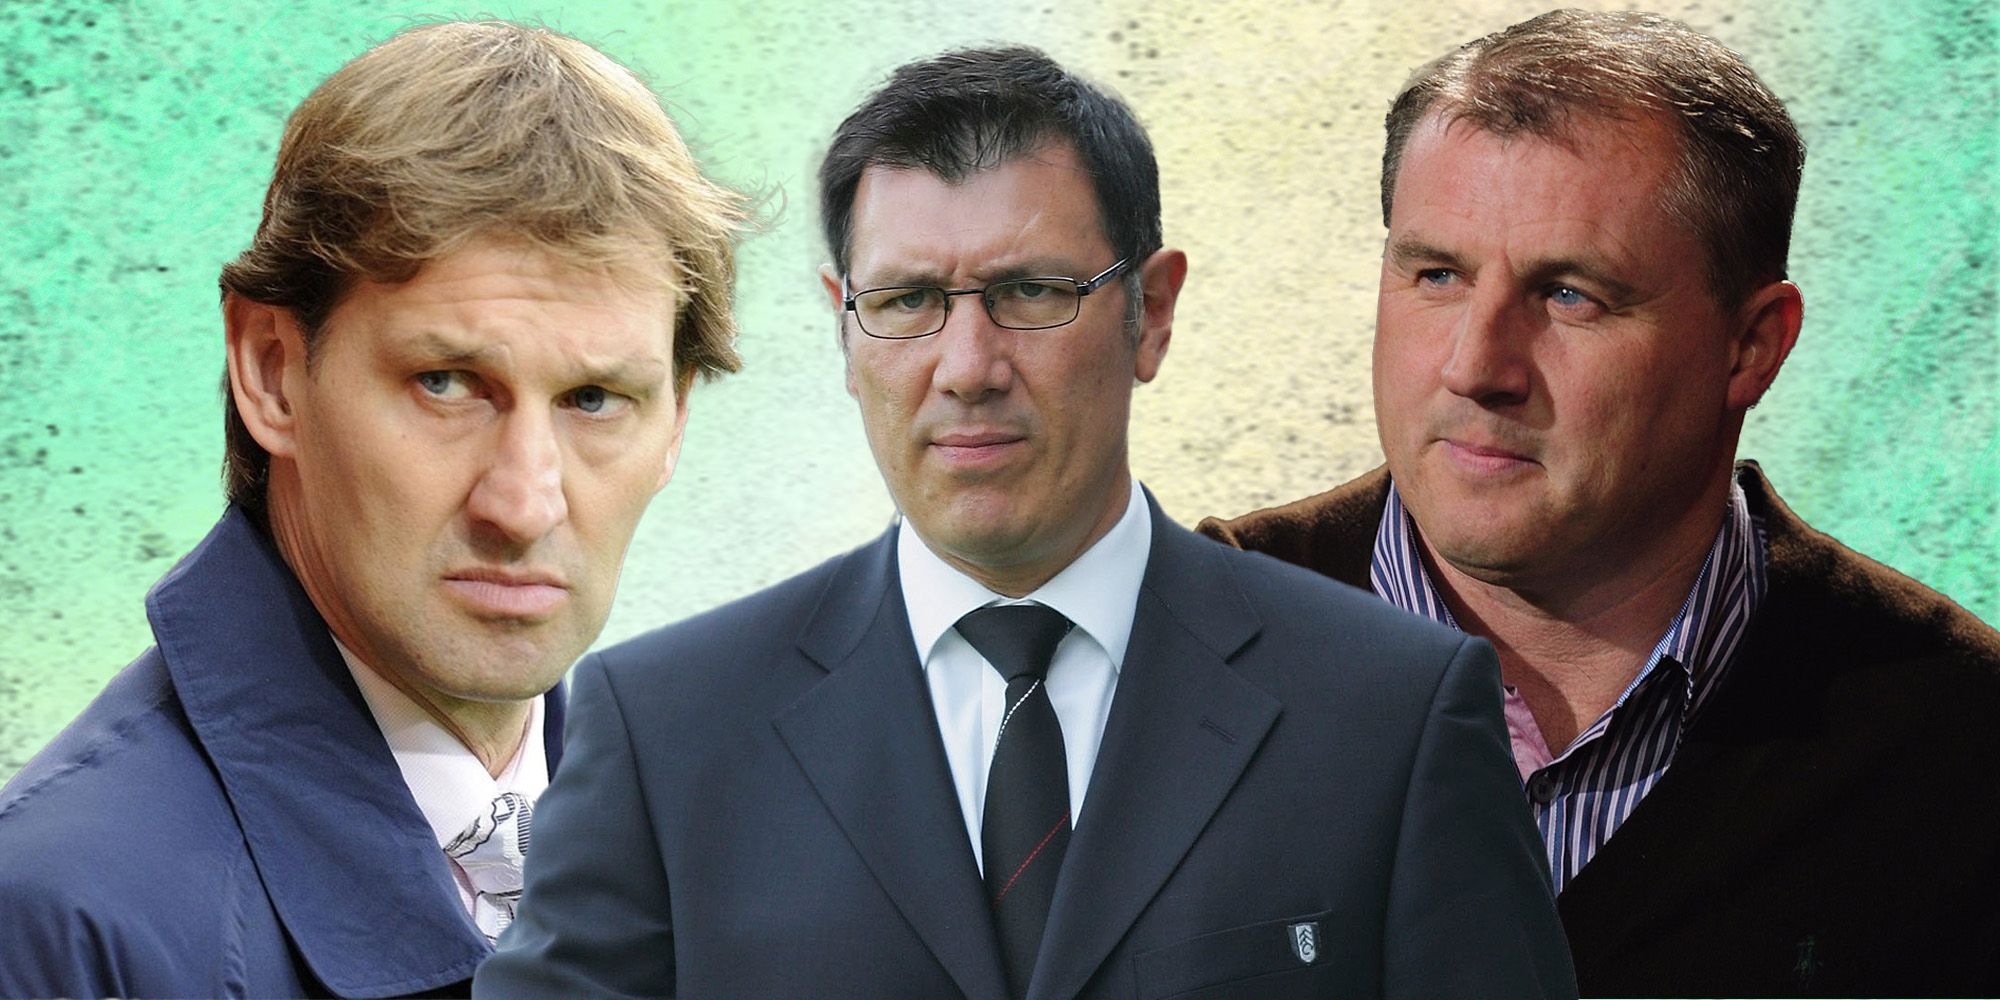 Collage of Tony Adams, Lawrie Sanchez and Paul Jewell.